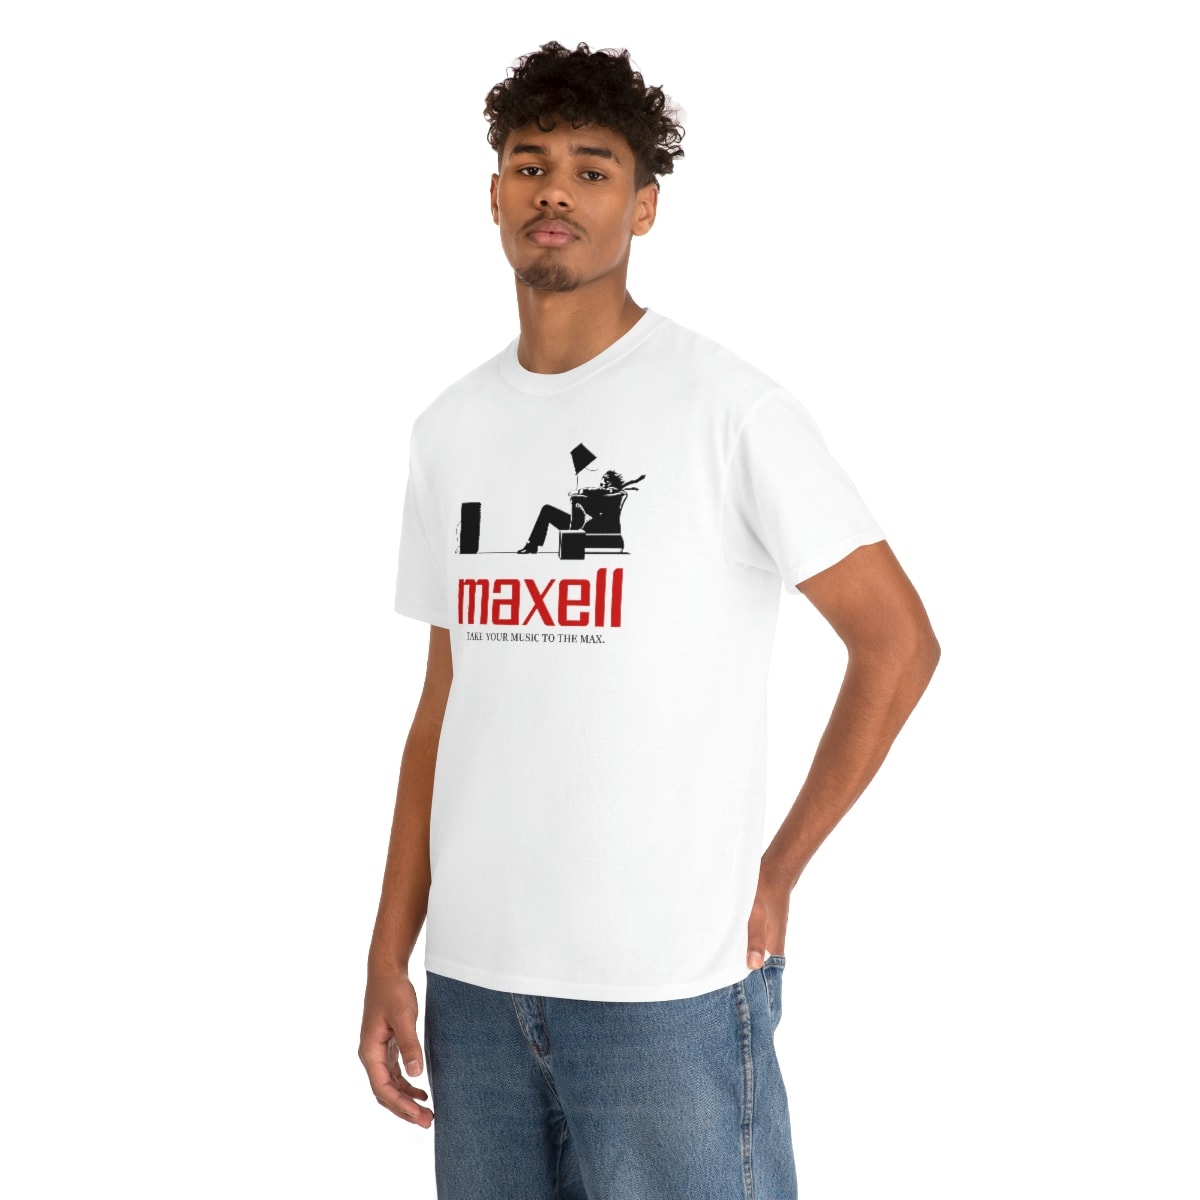 Maxell Unisex T-Shirt - Take Your Music to the Max - Merch Hunters